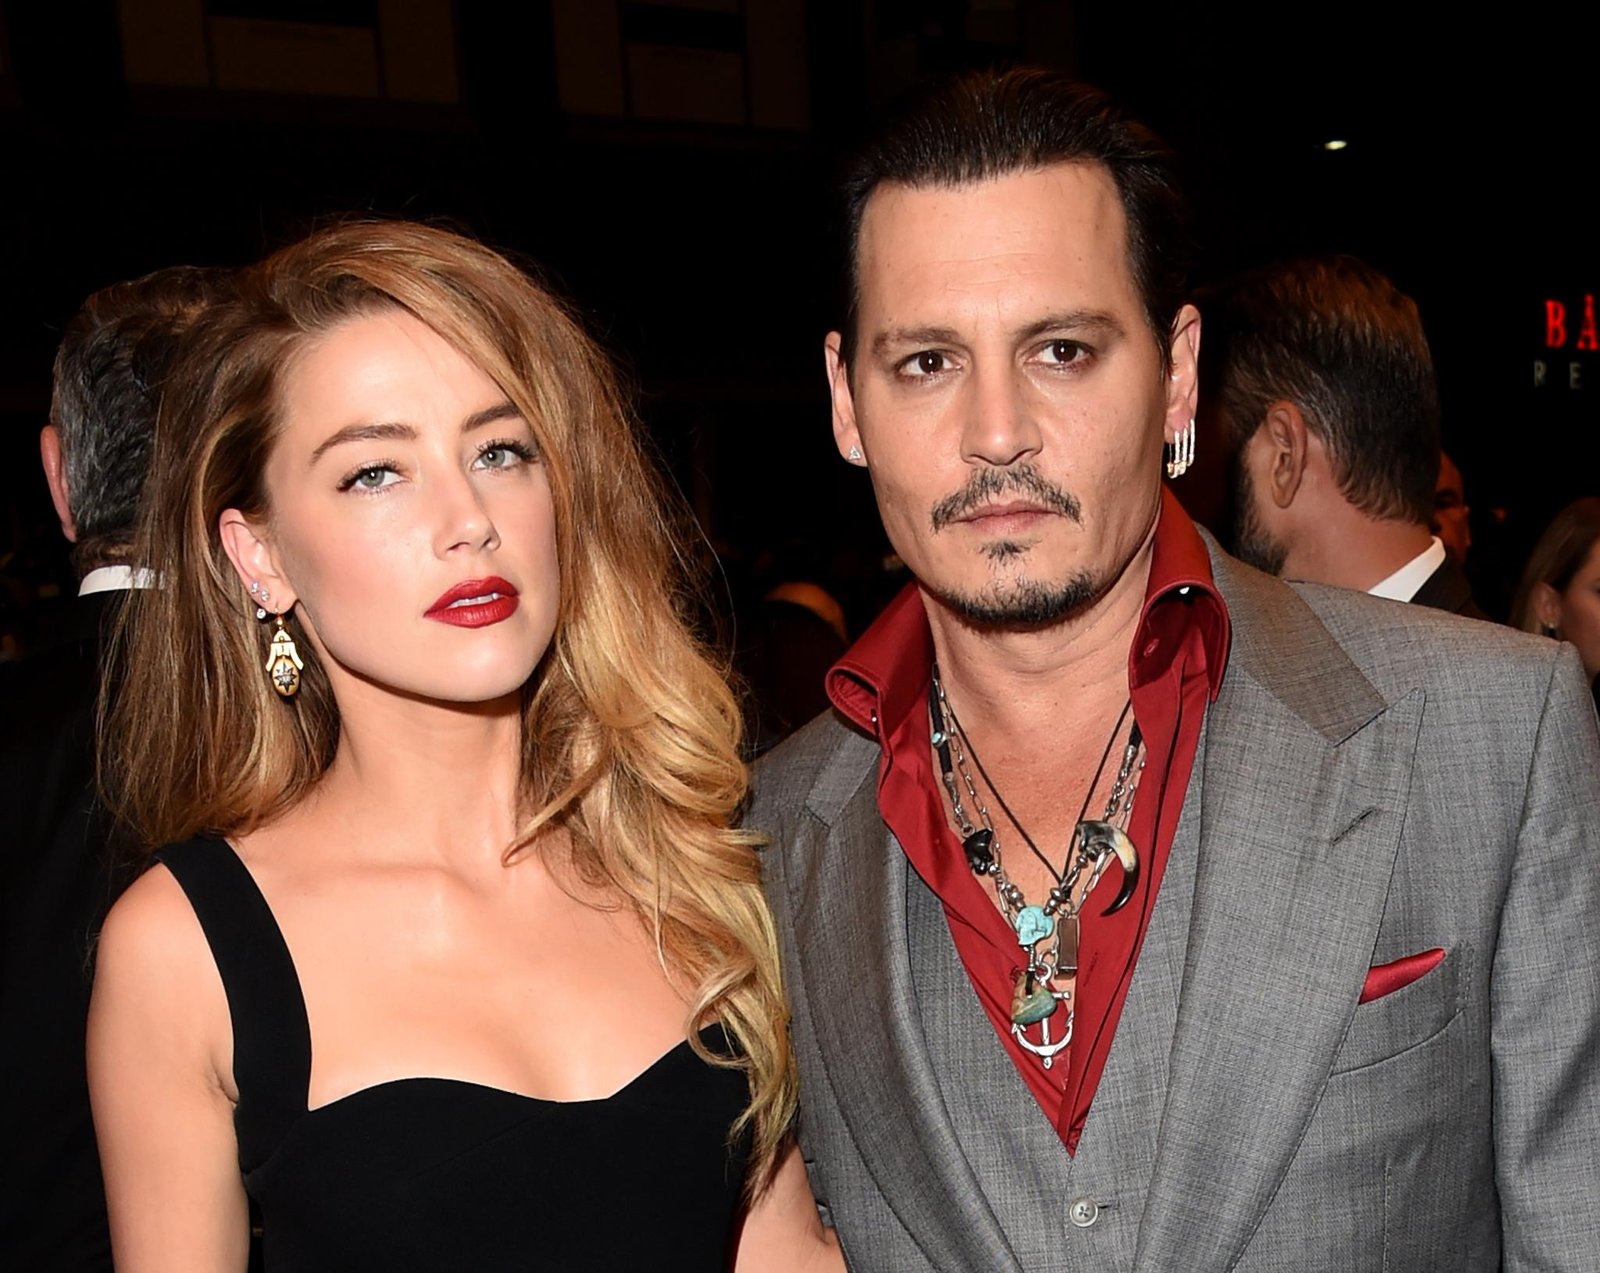 Johnny Depp and Amber Heard at an event.